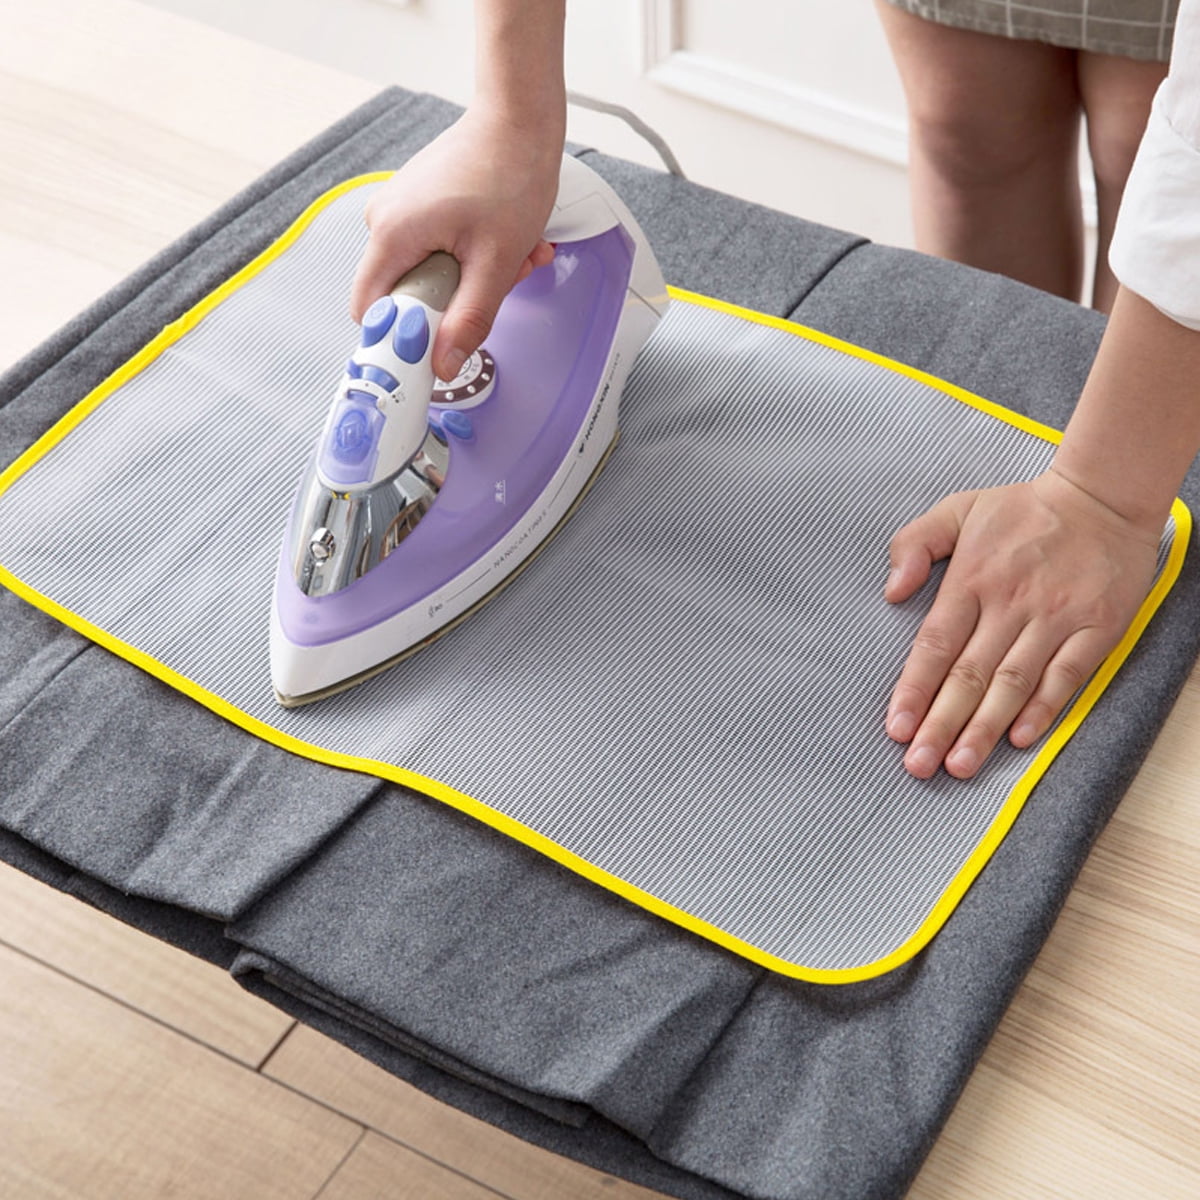 Minky Homecare Ironing Pressing Cloth Washable And Reusable Large Size 